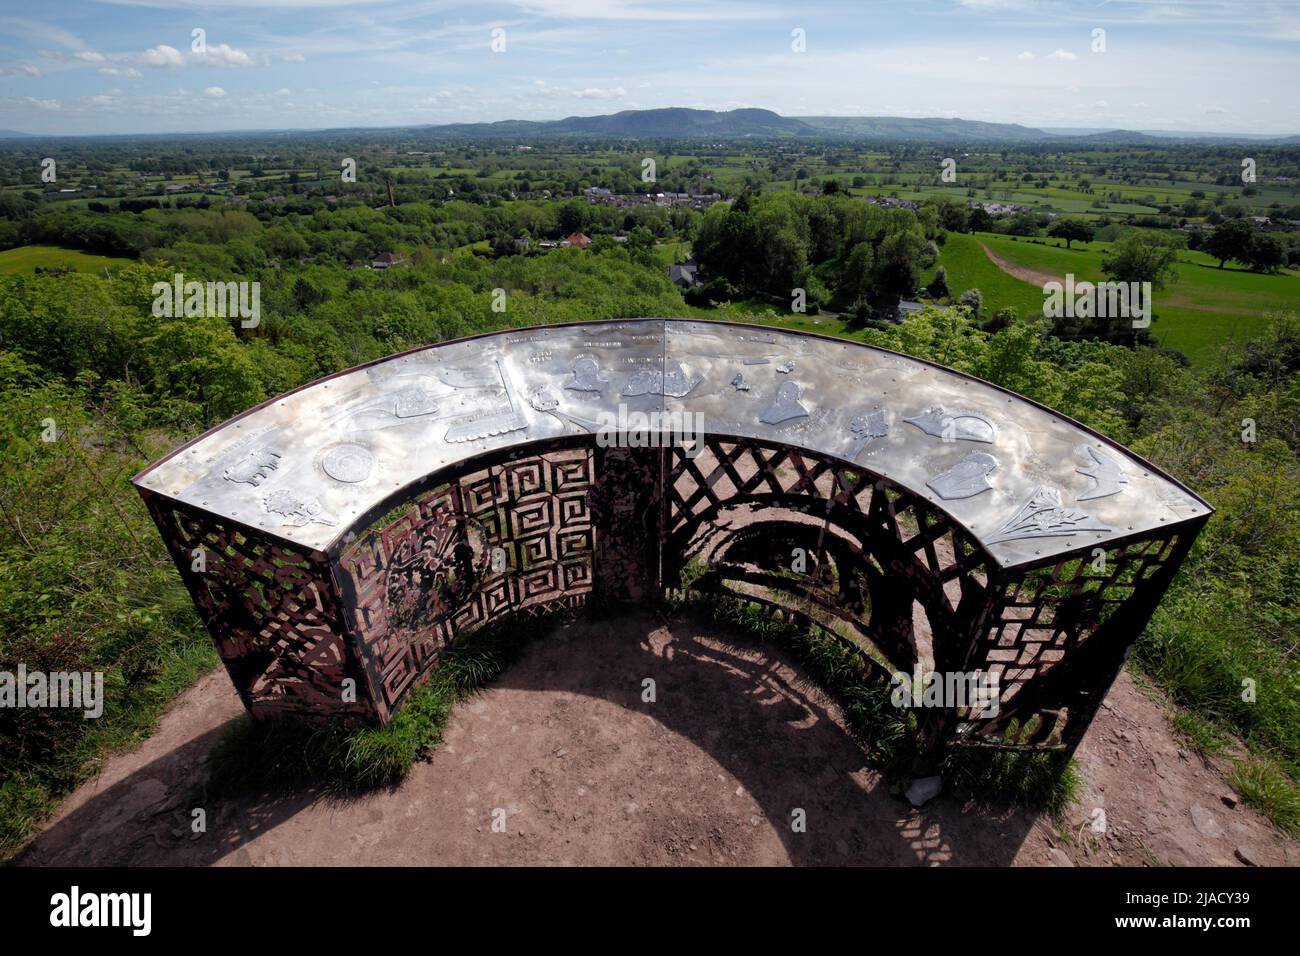 Llanymynech Rocks viewpoint sculpture and information stand. Shropshire, UK, GB. Stock Photo